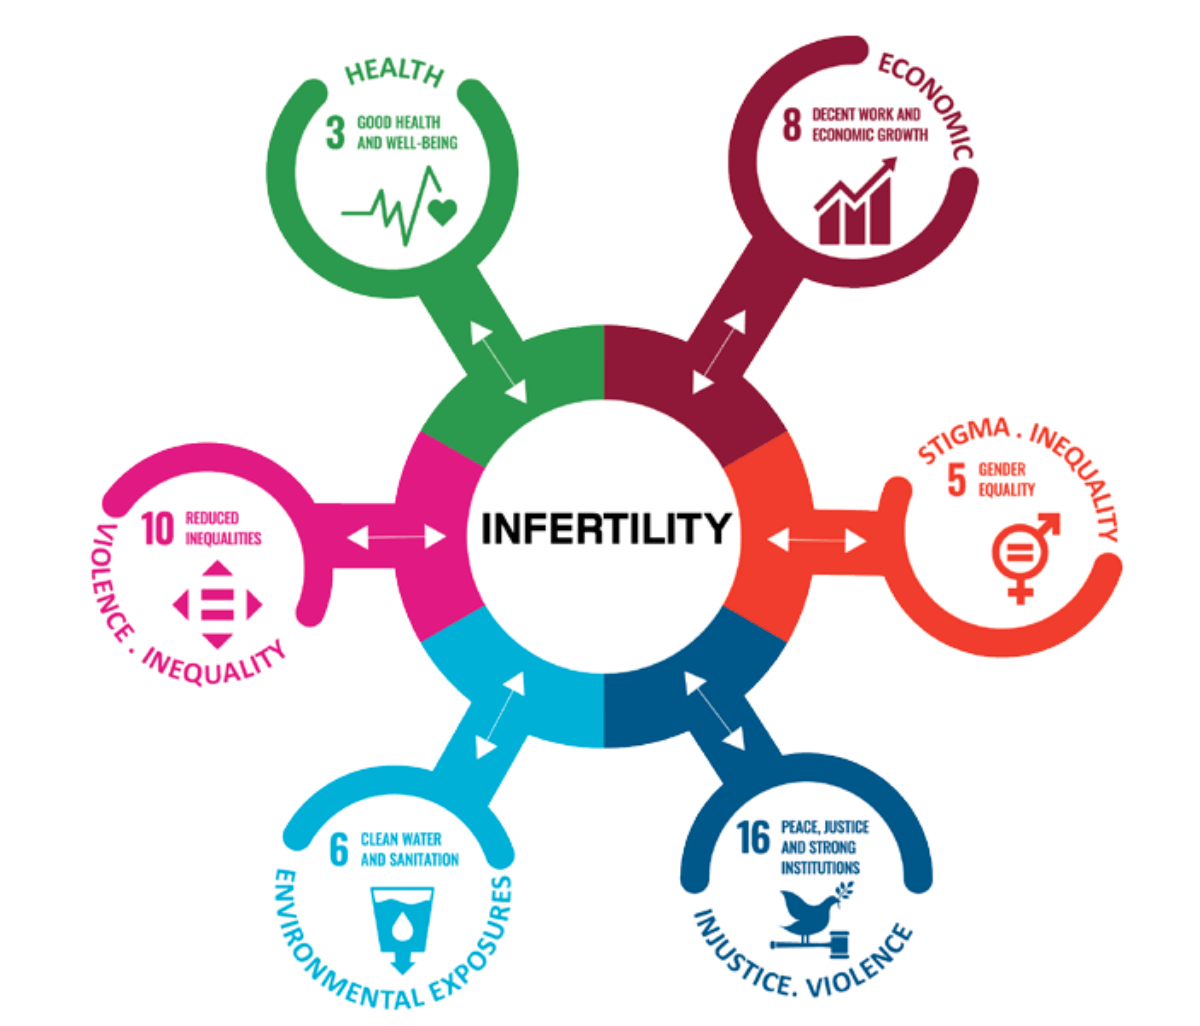 Breaking The Silence on Infertility: Policy Brief